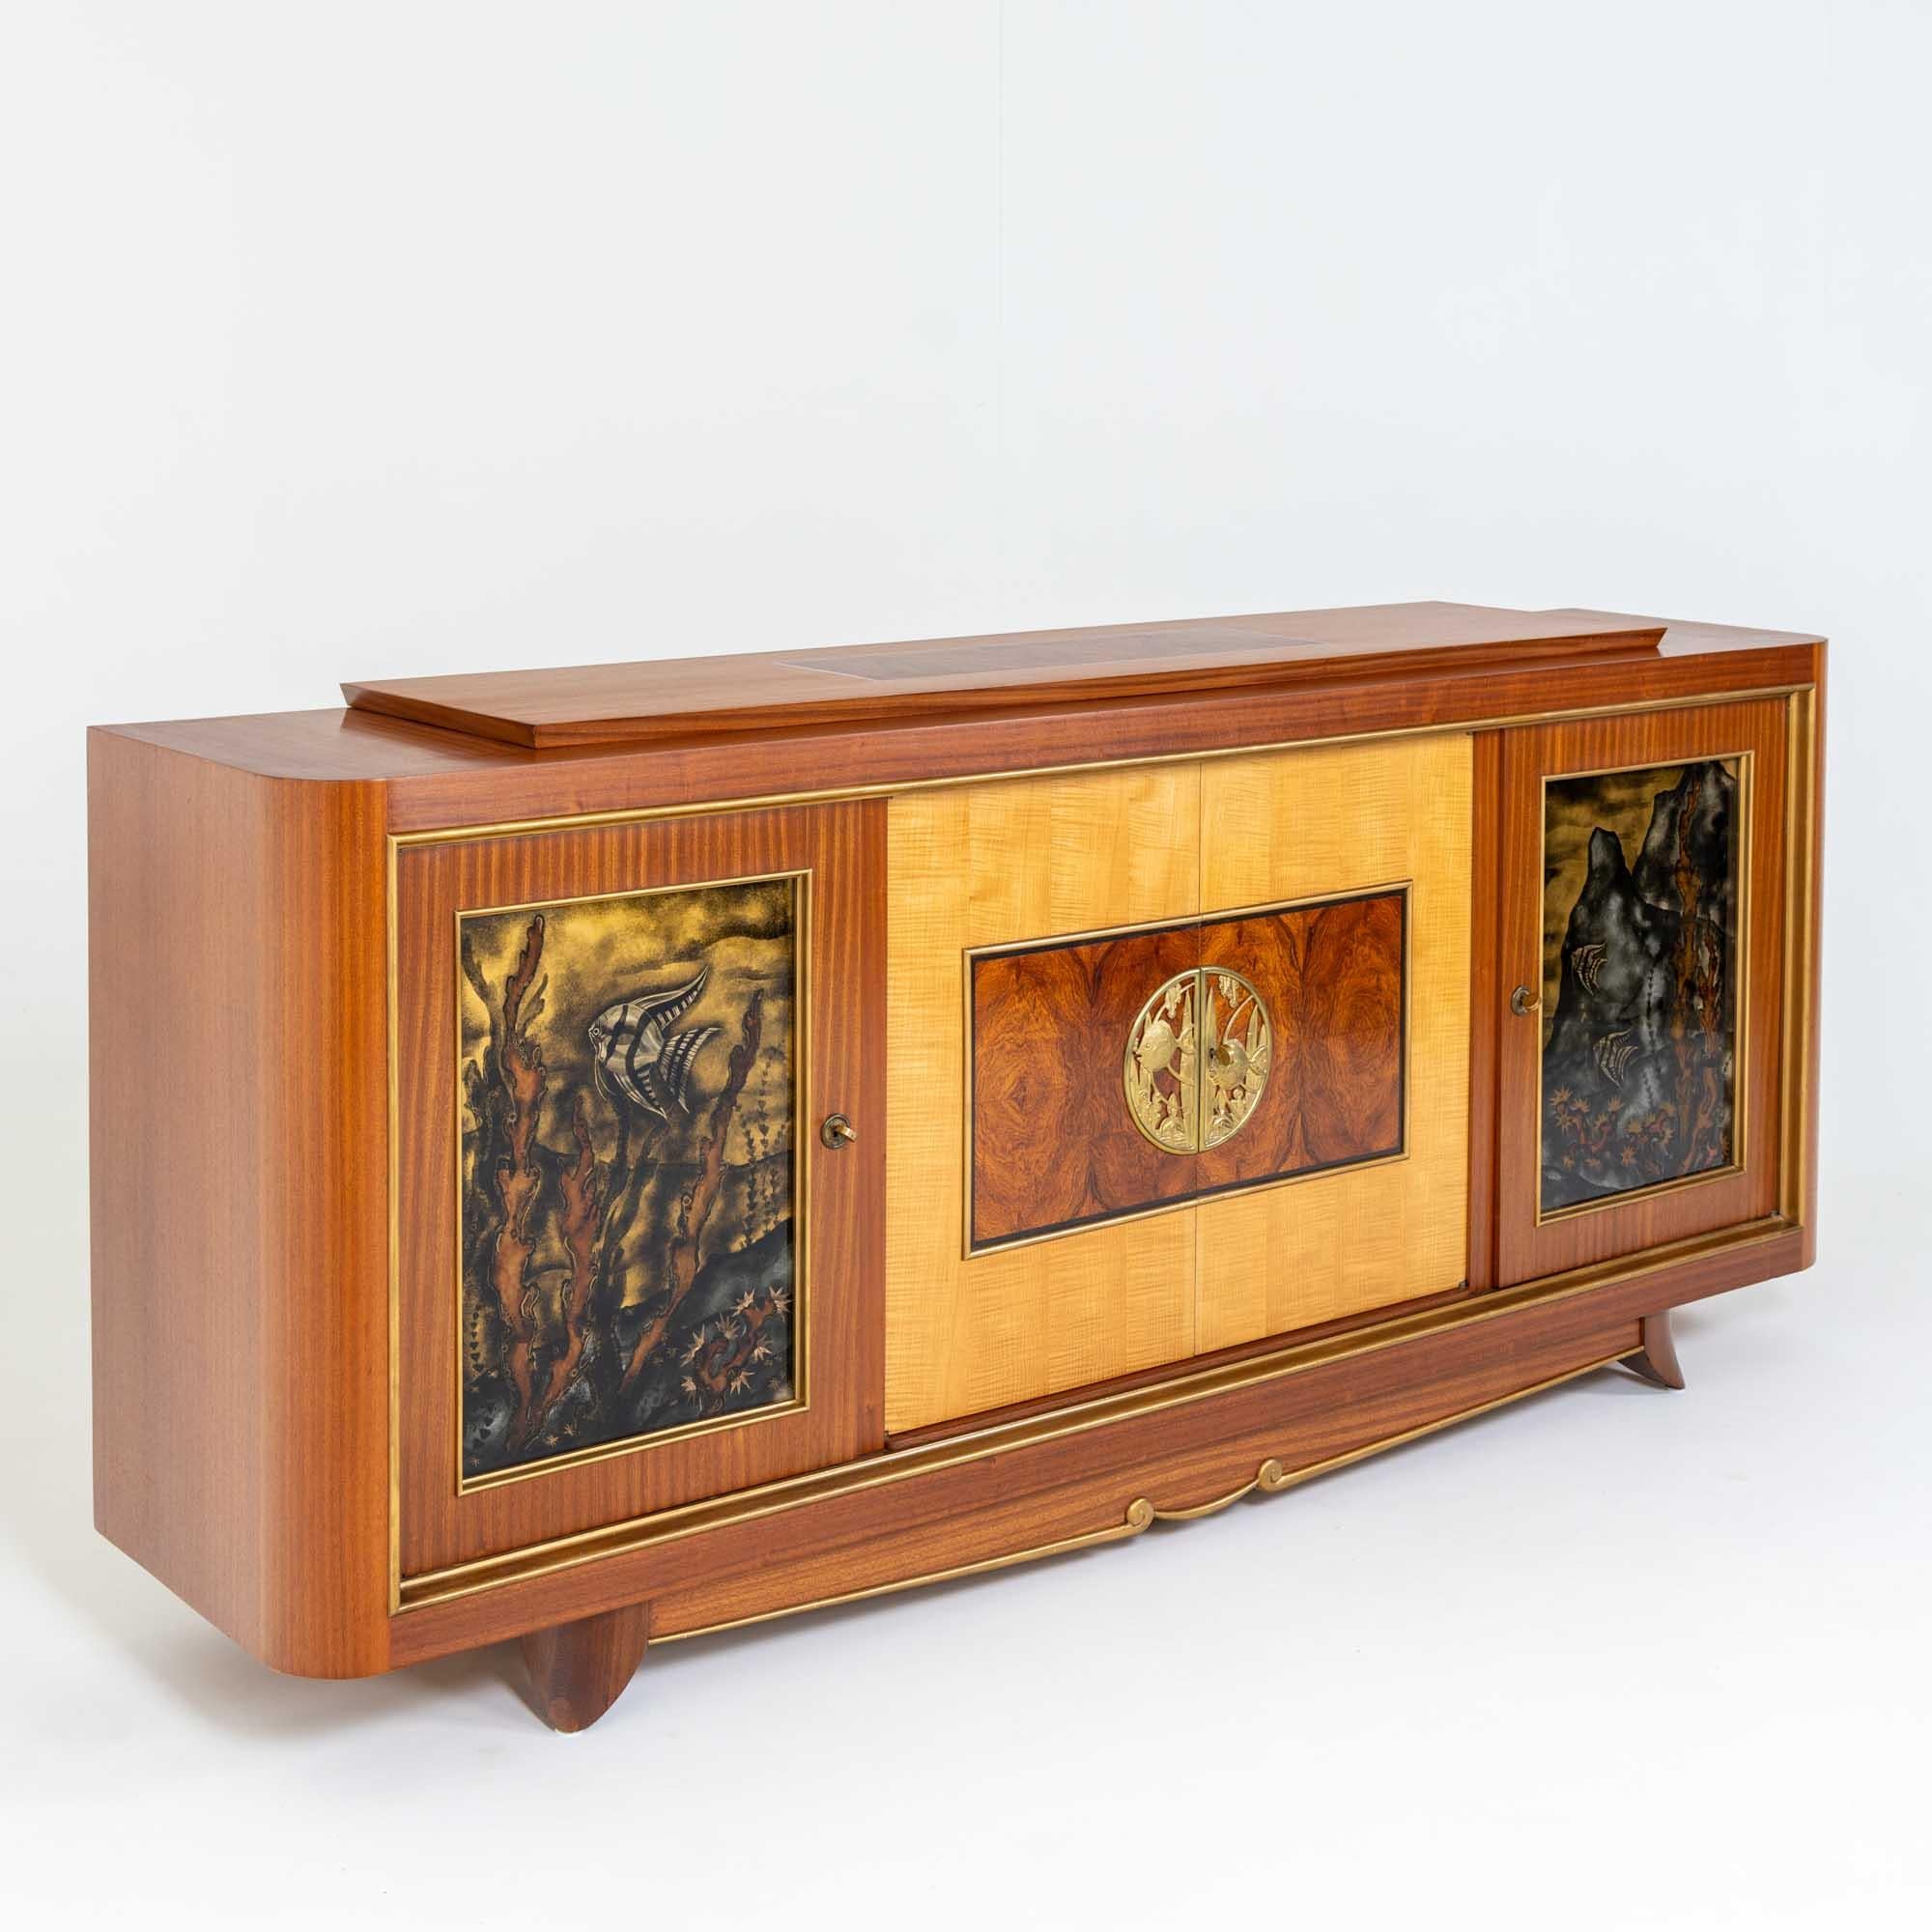 Art Deco Sideboard with Reverse Glass Painted Panels of Fish, France around 1930 For Sale 3